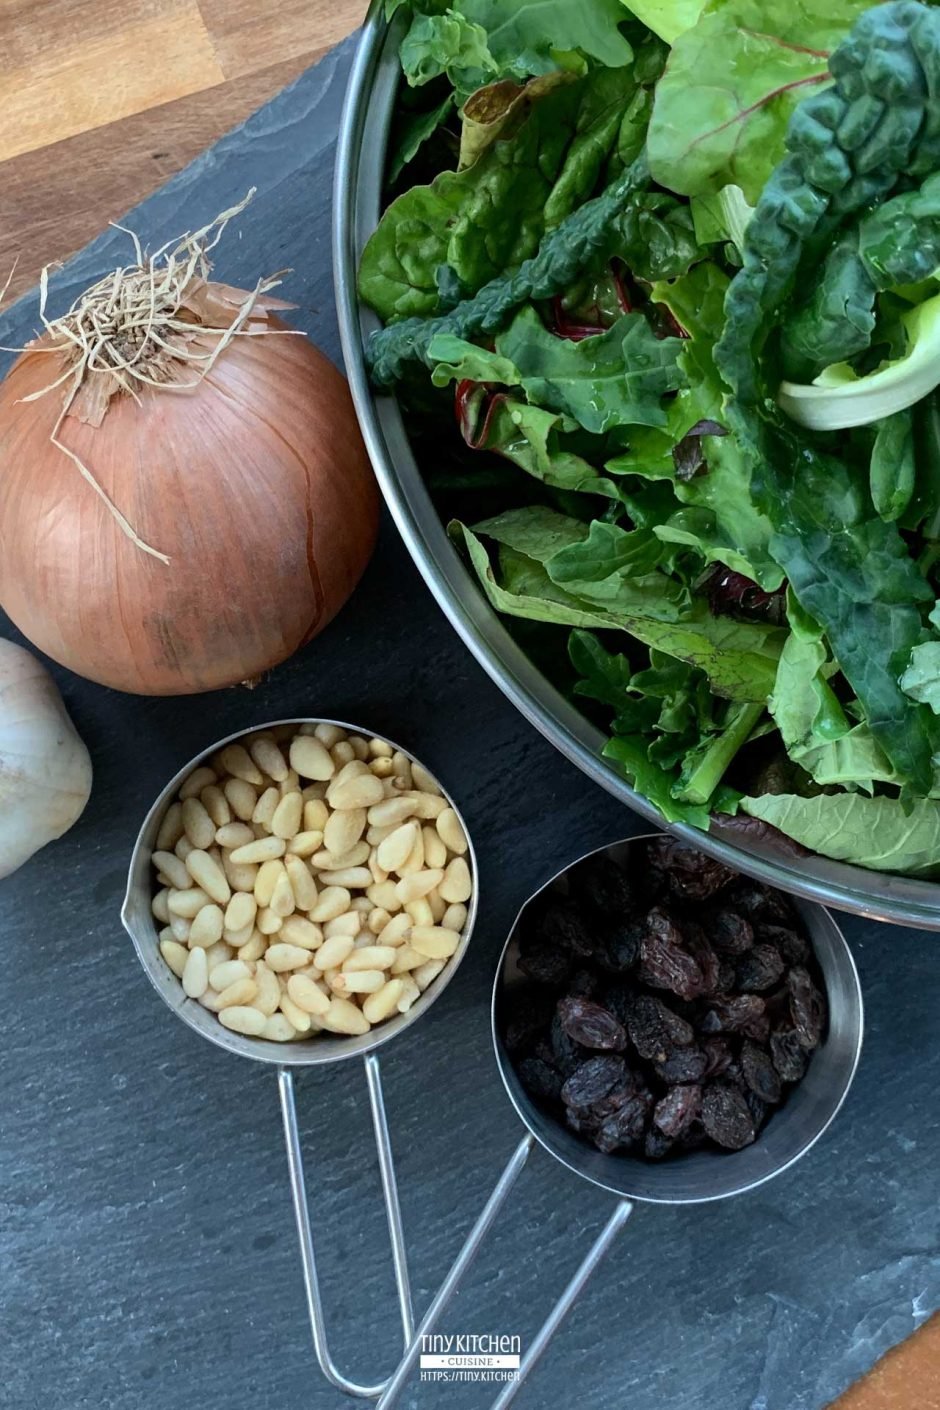 A bowl of fresh mixed braising greens next to an onion, a head of garlic, and two measuring cups filled with pine nuts and raisins.